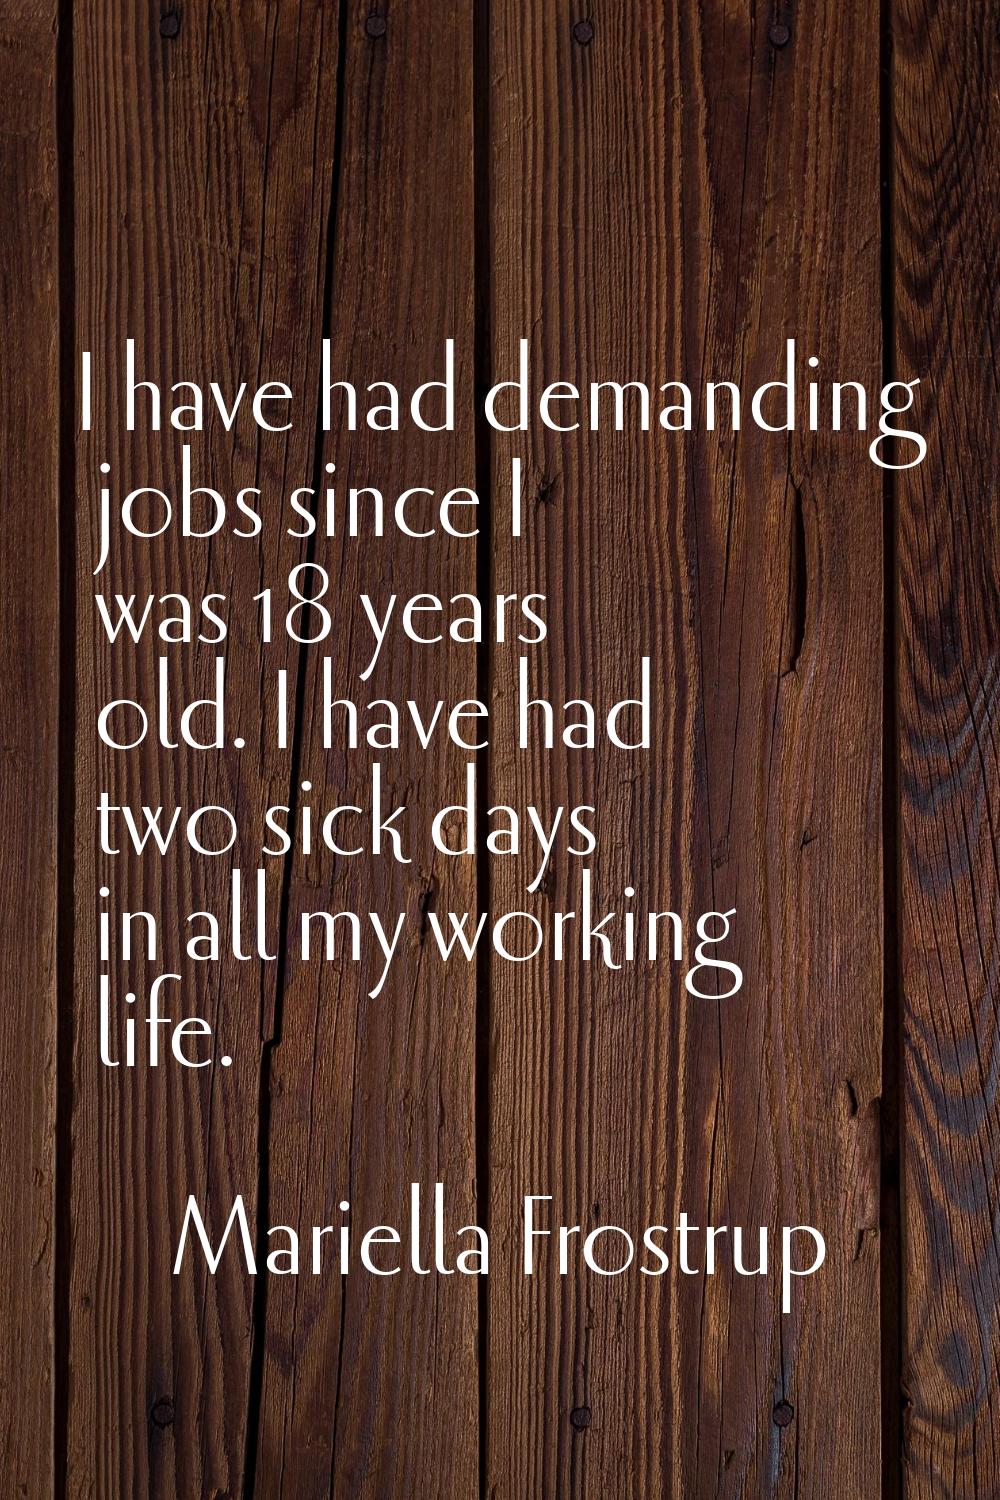 I have had demanding jobs since I was 18 years old. I have had two sick days in all my working life